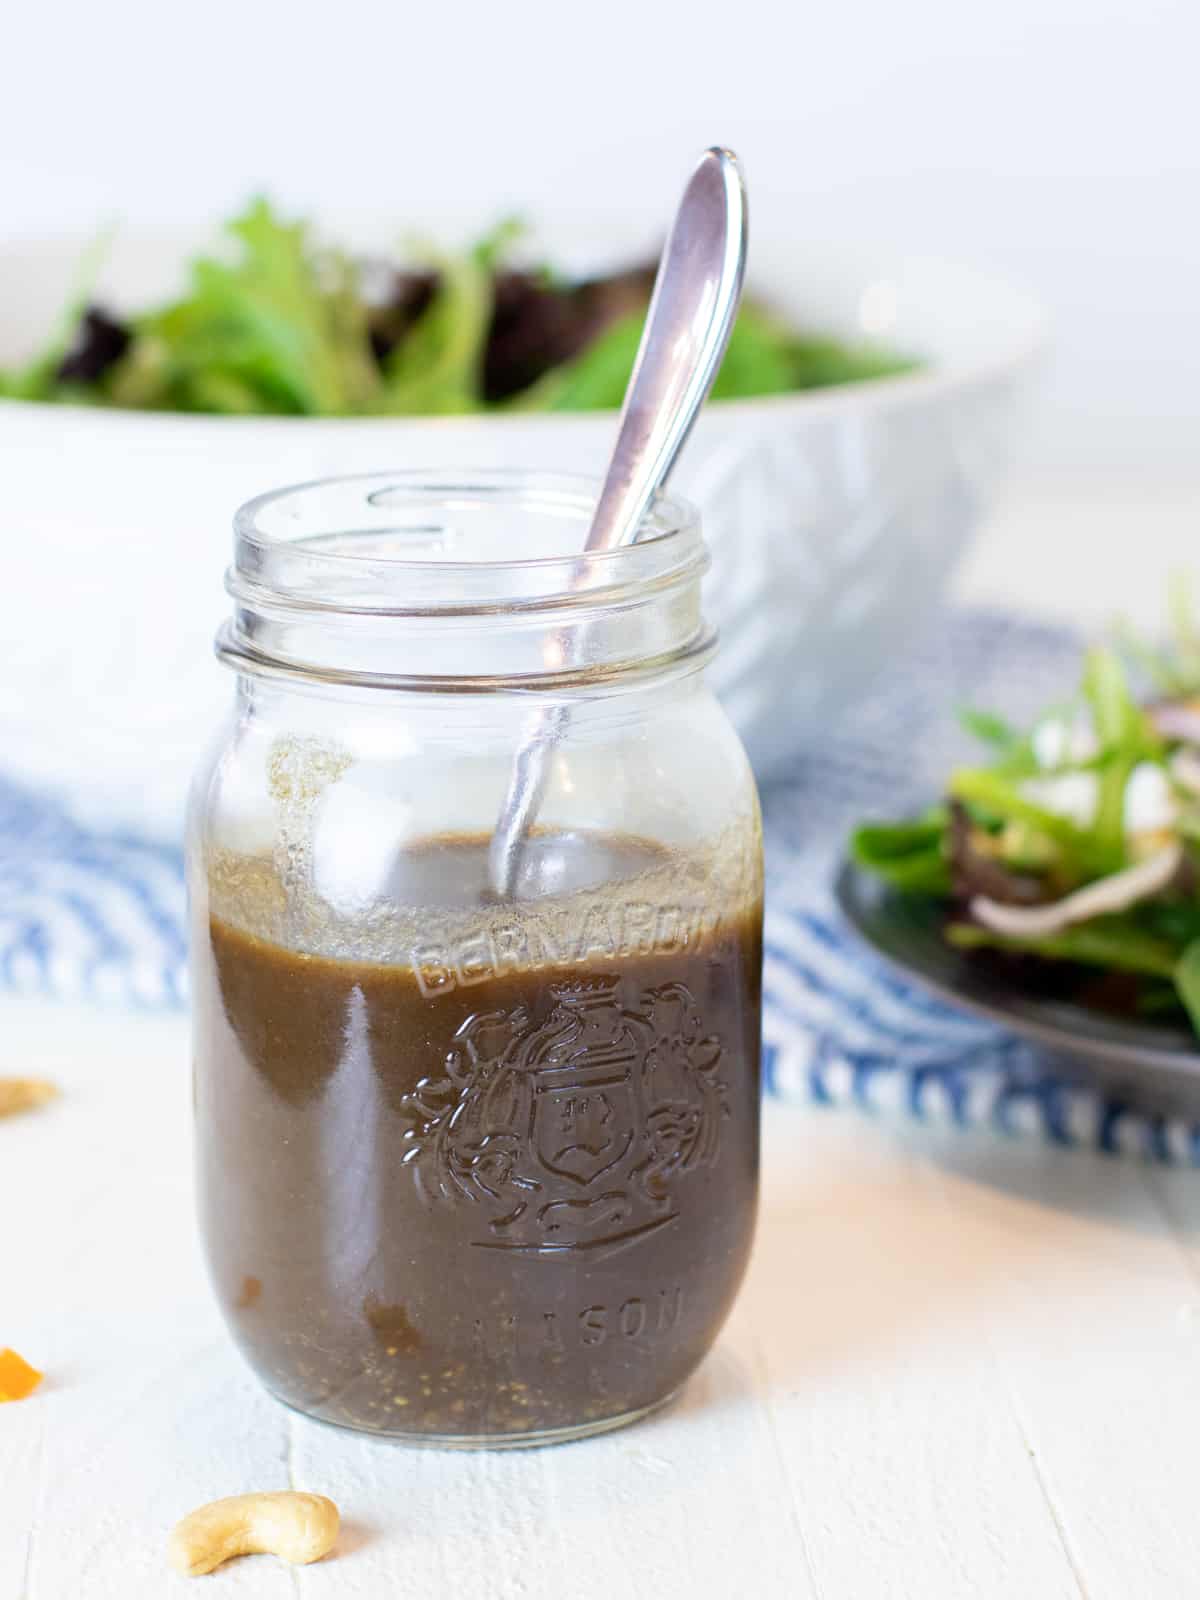 Homemade balsamic vinaigrette in a jar with fresh salad in the background.